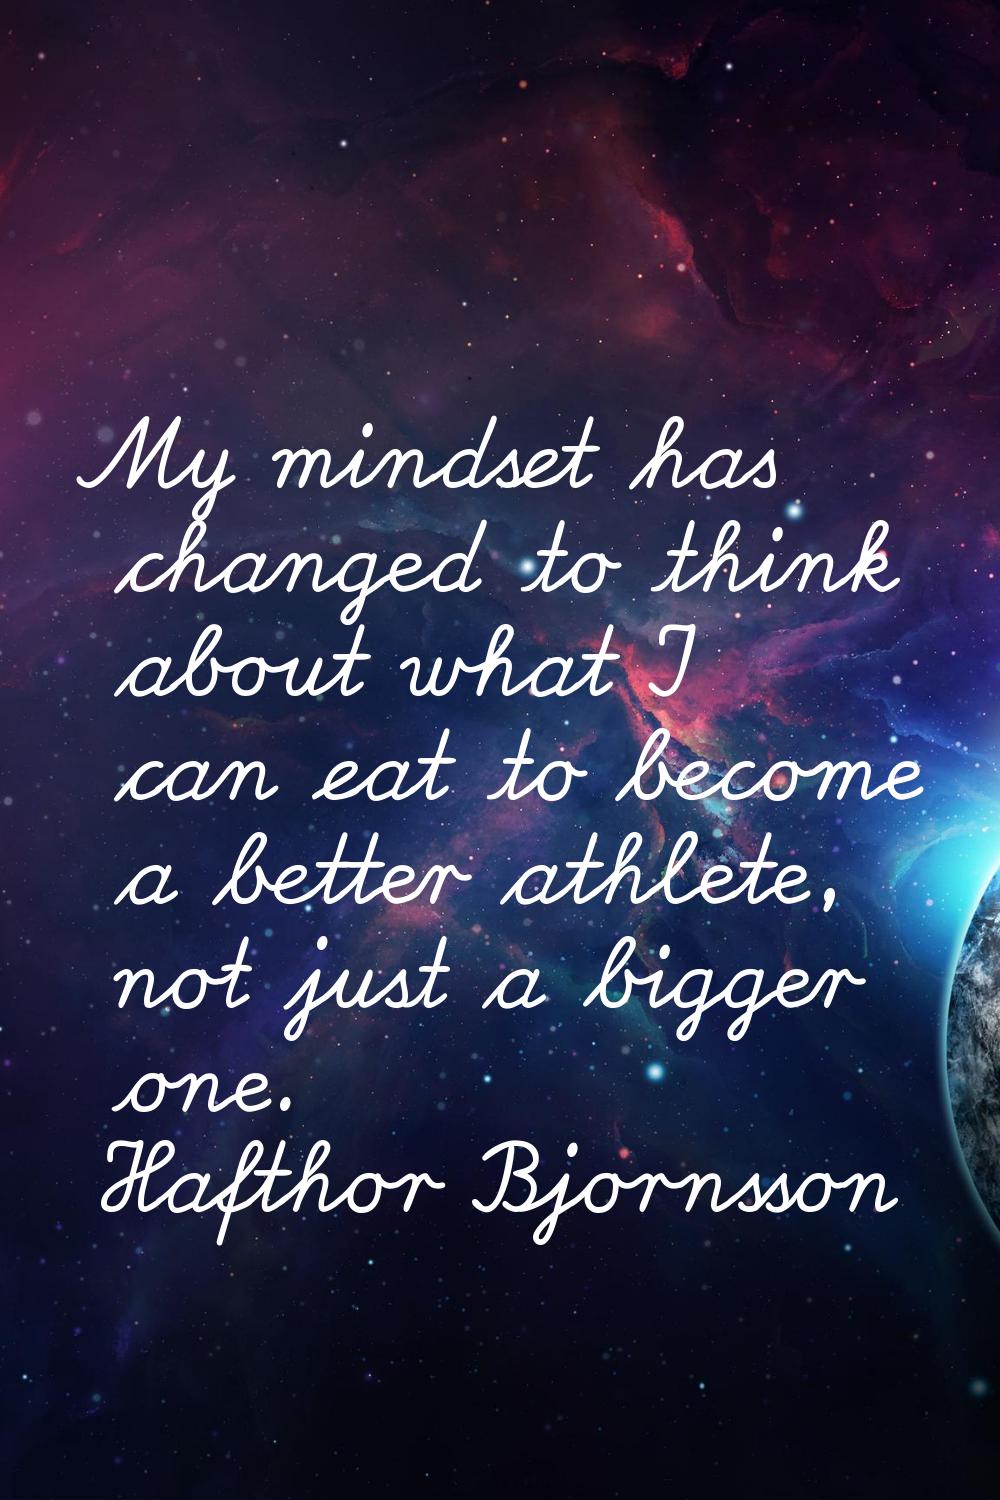 My mindset has changed to think about what I can eat to become a better athlete, not just a bigger 